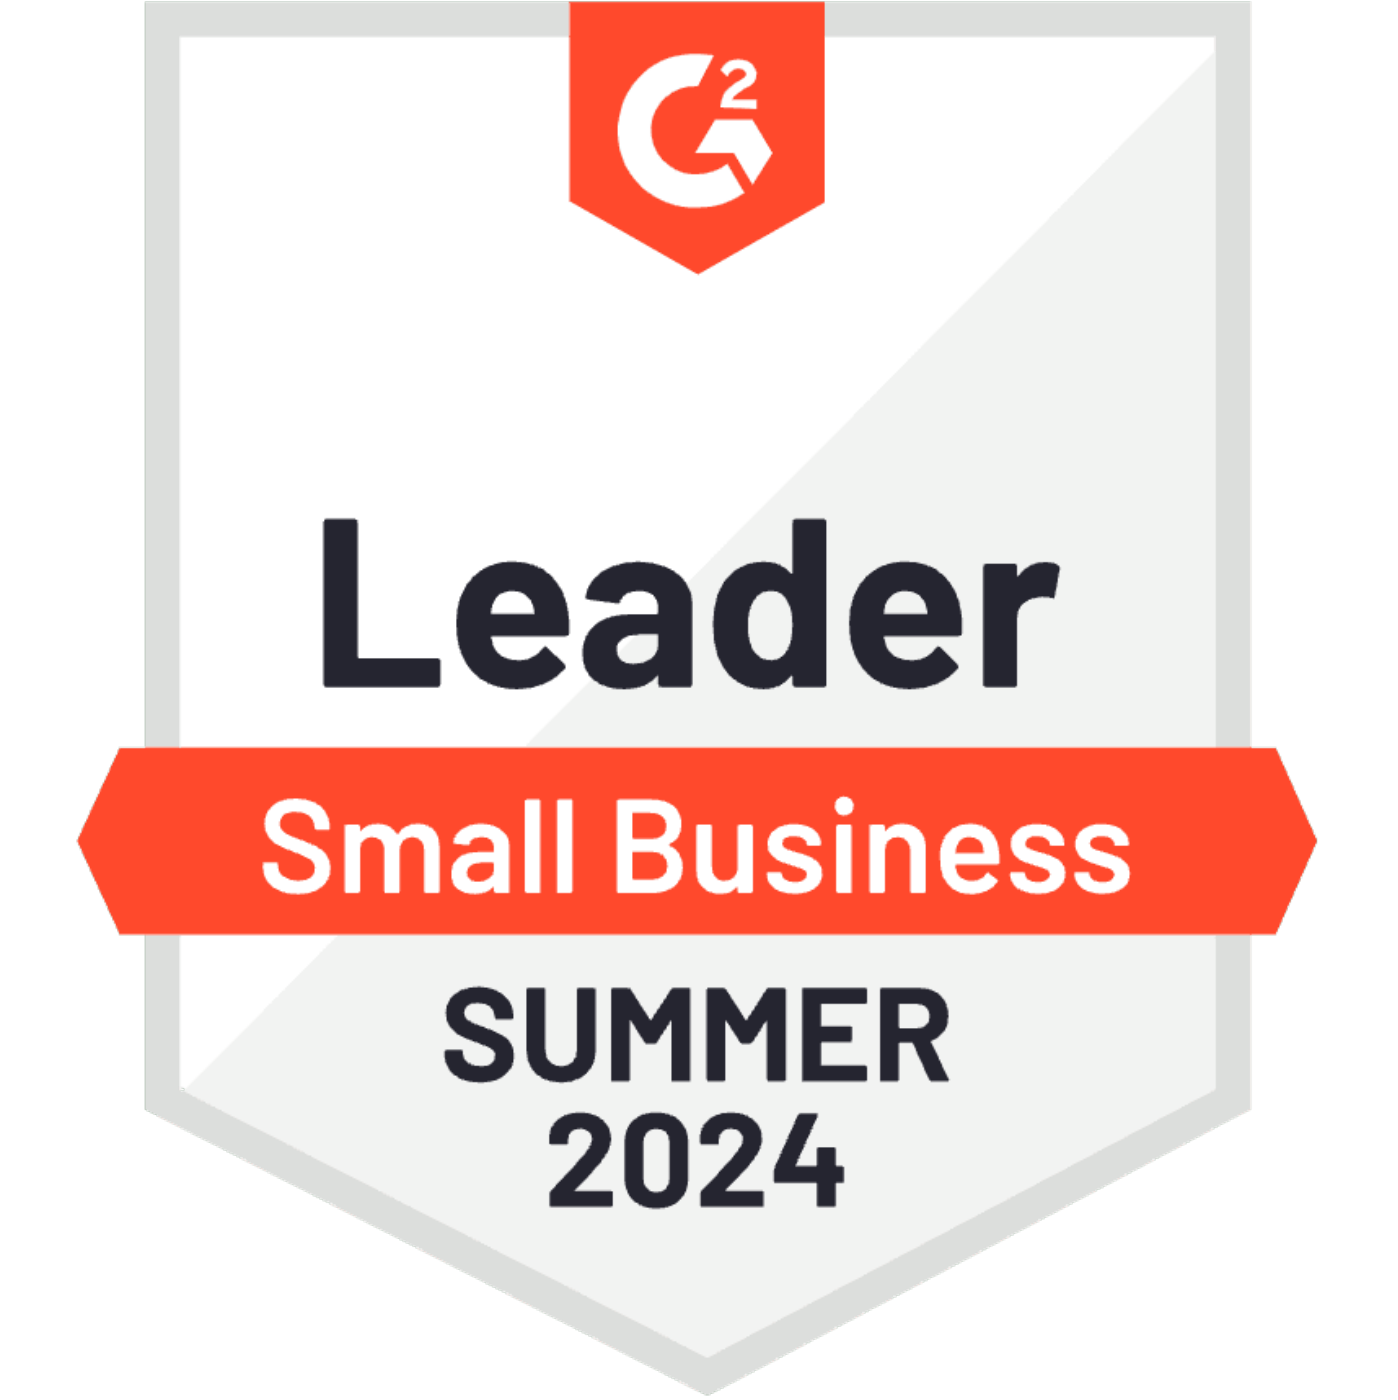 G2 Leader Small Business Summer 2024